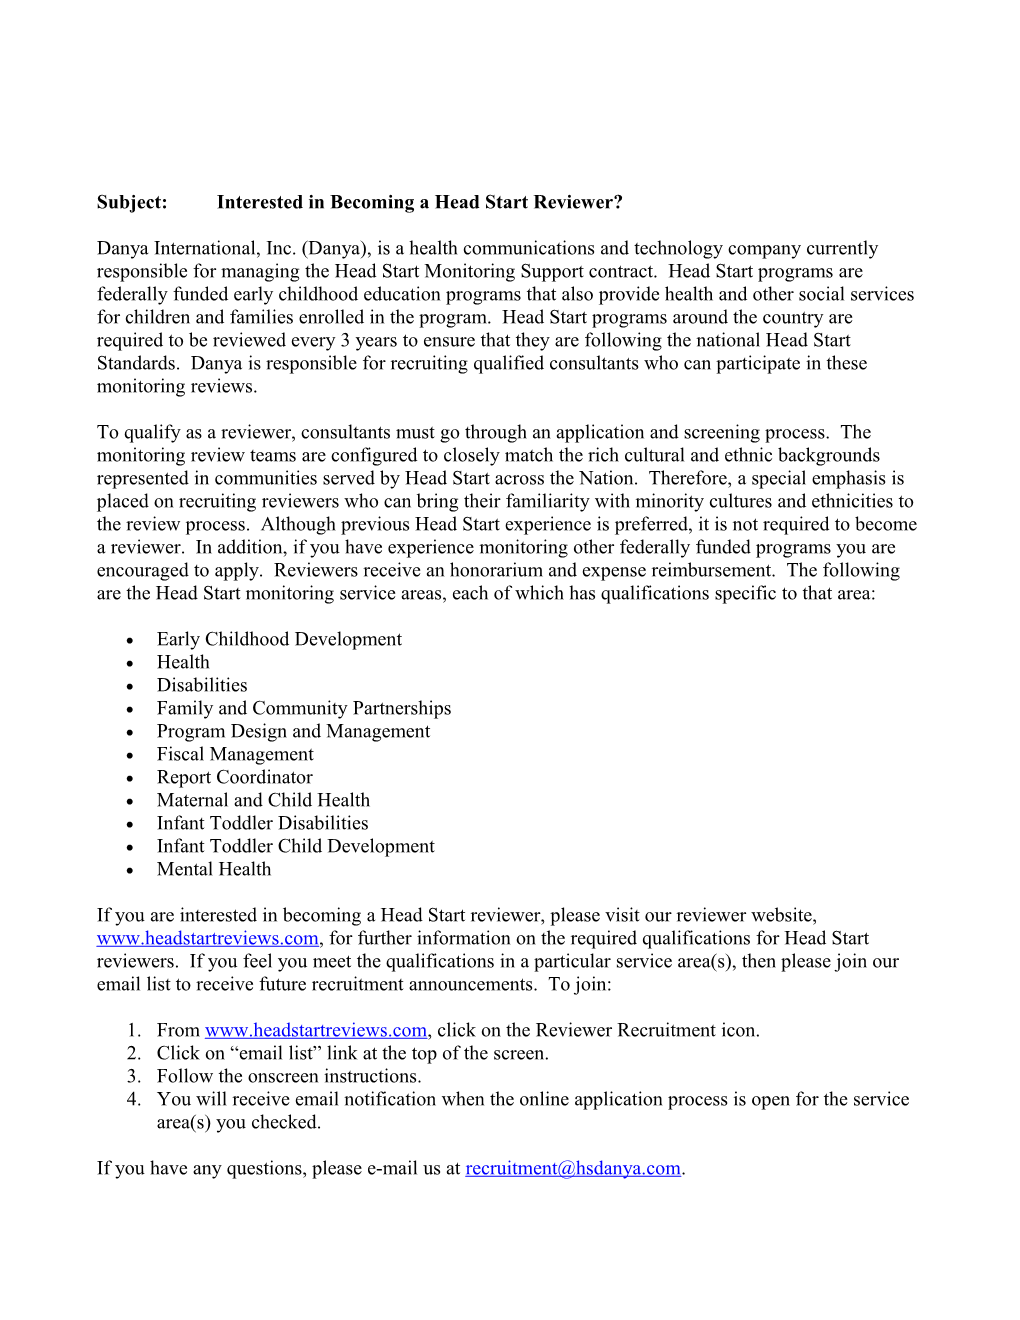 Subject: Interested in Becoming a Head Start Reviewer?